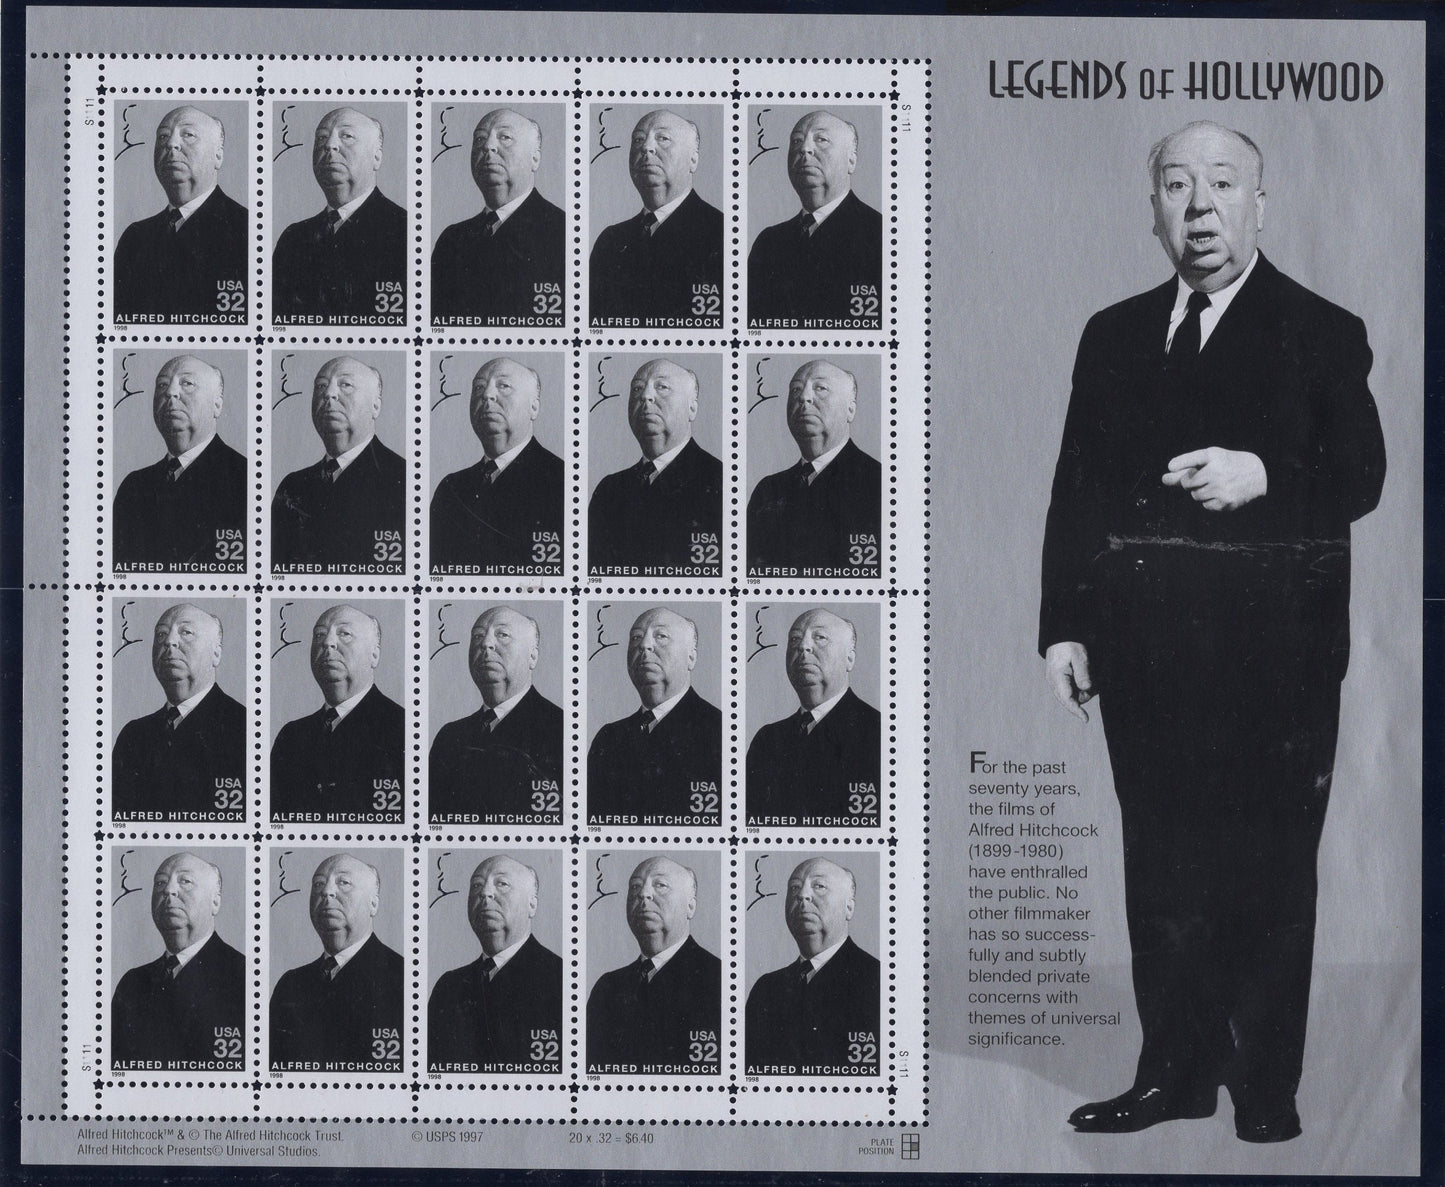 ALFRED HITCHCOCK Cinema Legend of HOLLYWOOD Decorative Sheet of 20 32c Stamps - Bright Fresh - Issued in 1998 - s3226 s -